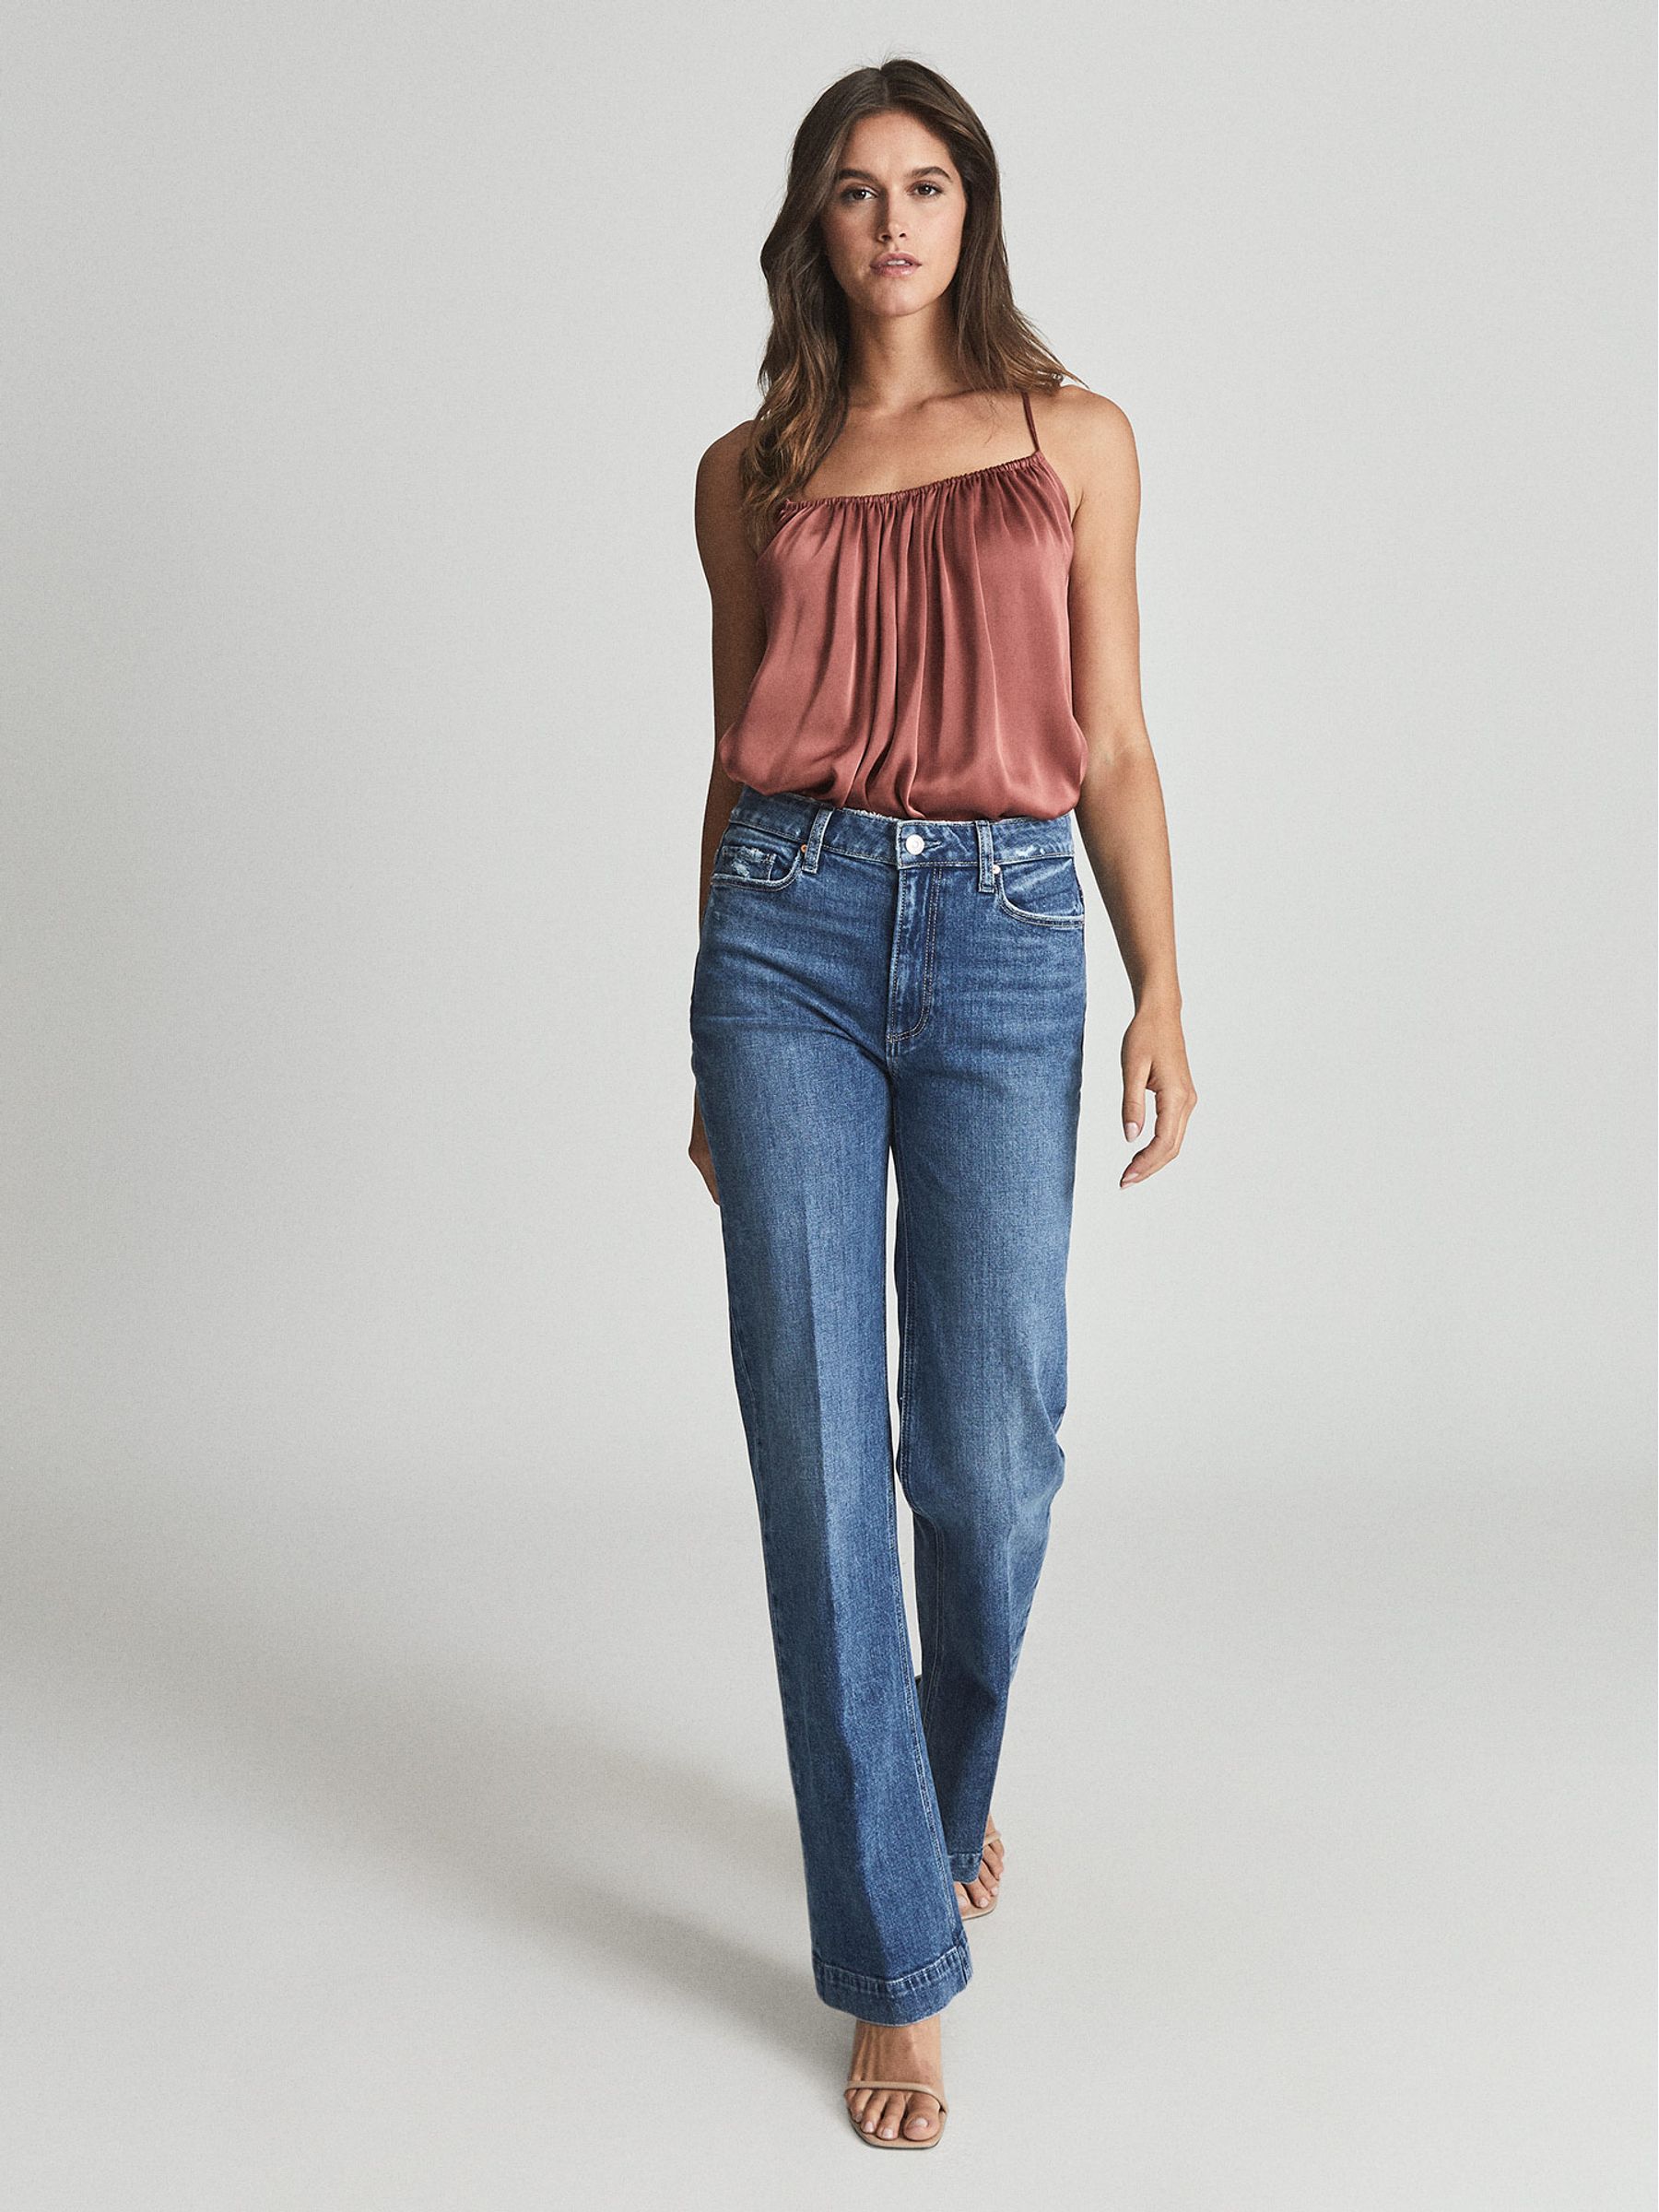 Paige High Rise Flared Jeans in Mid Blue - REISS